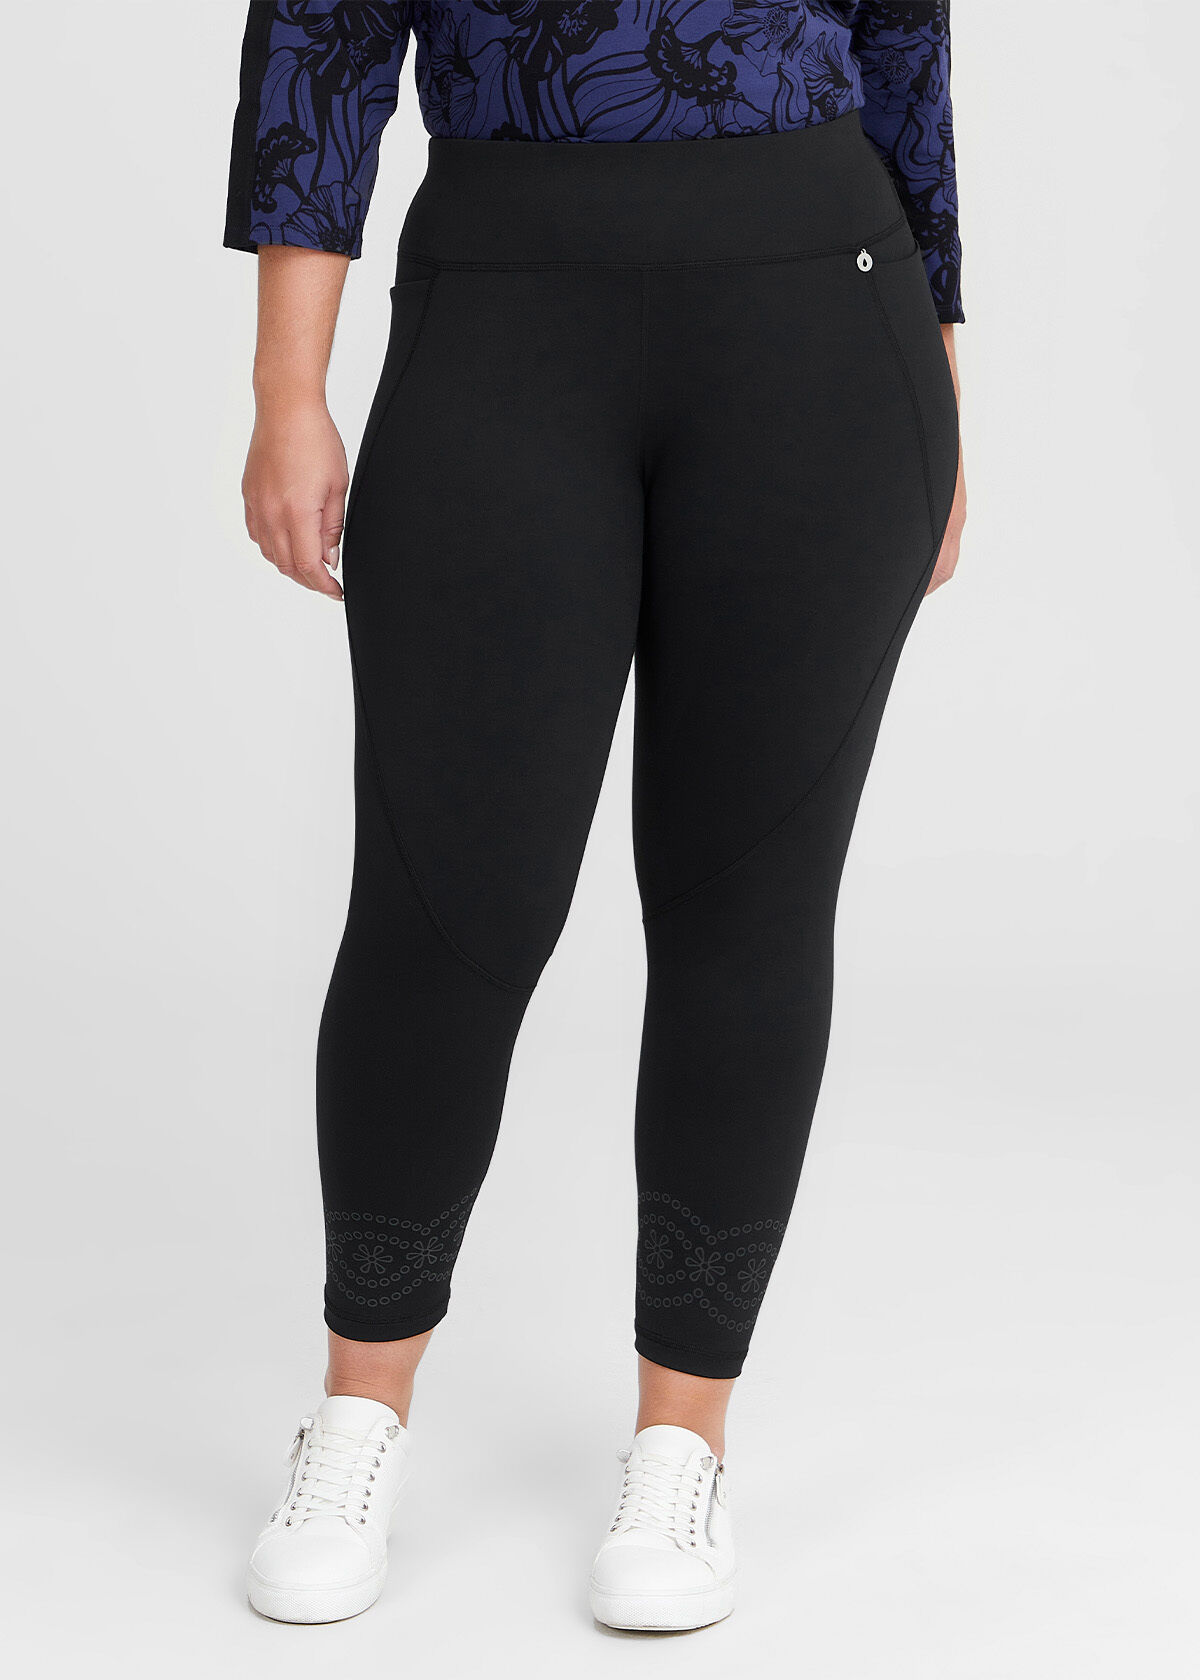 Buy Stretch is Comfort Womens Foldover Plus Size Color Yoga Pants Black XX Large at Amazonin